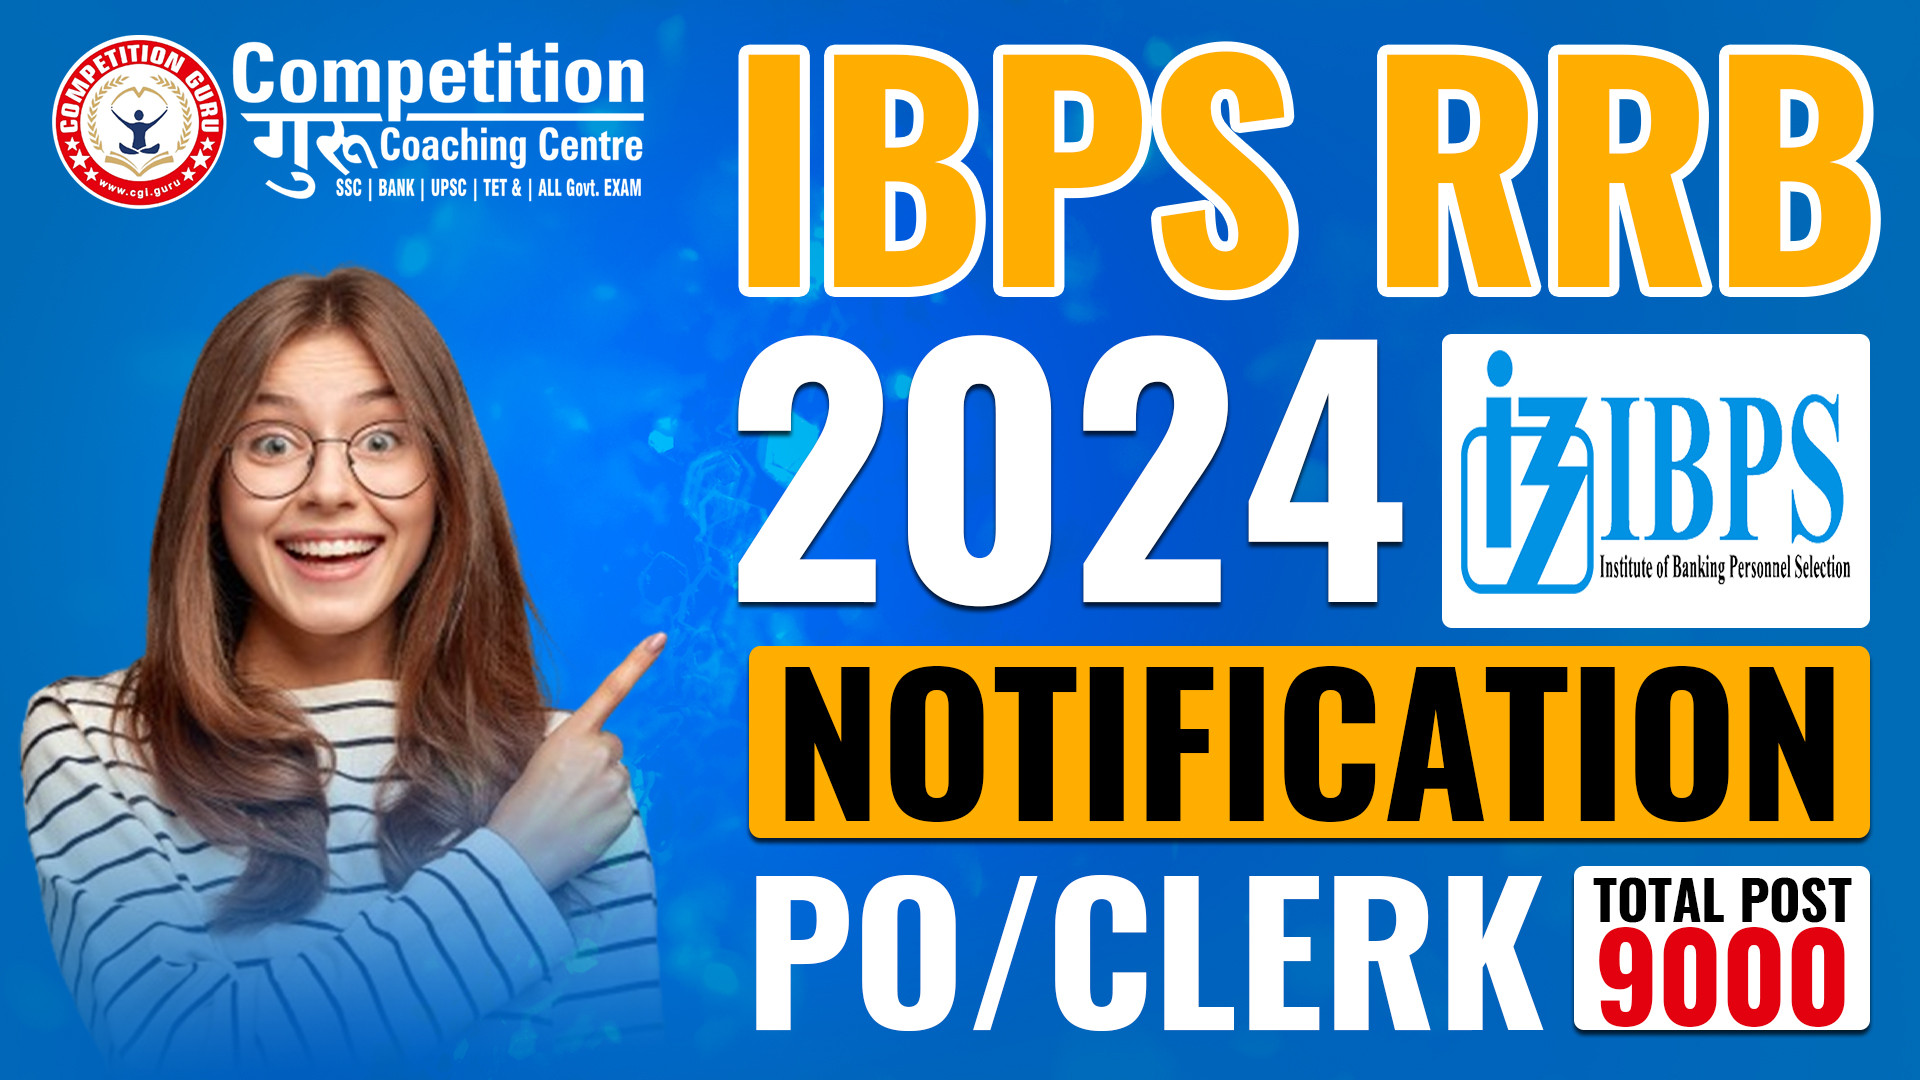 IBPS RRB NOTIFICATION OUT 2024